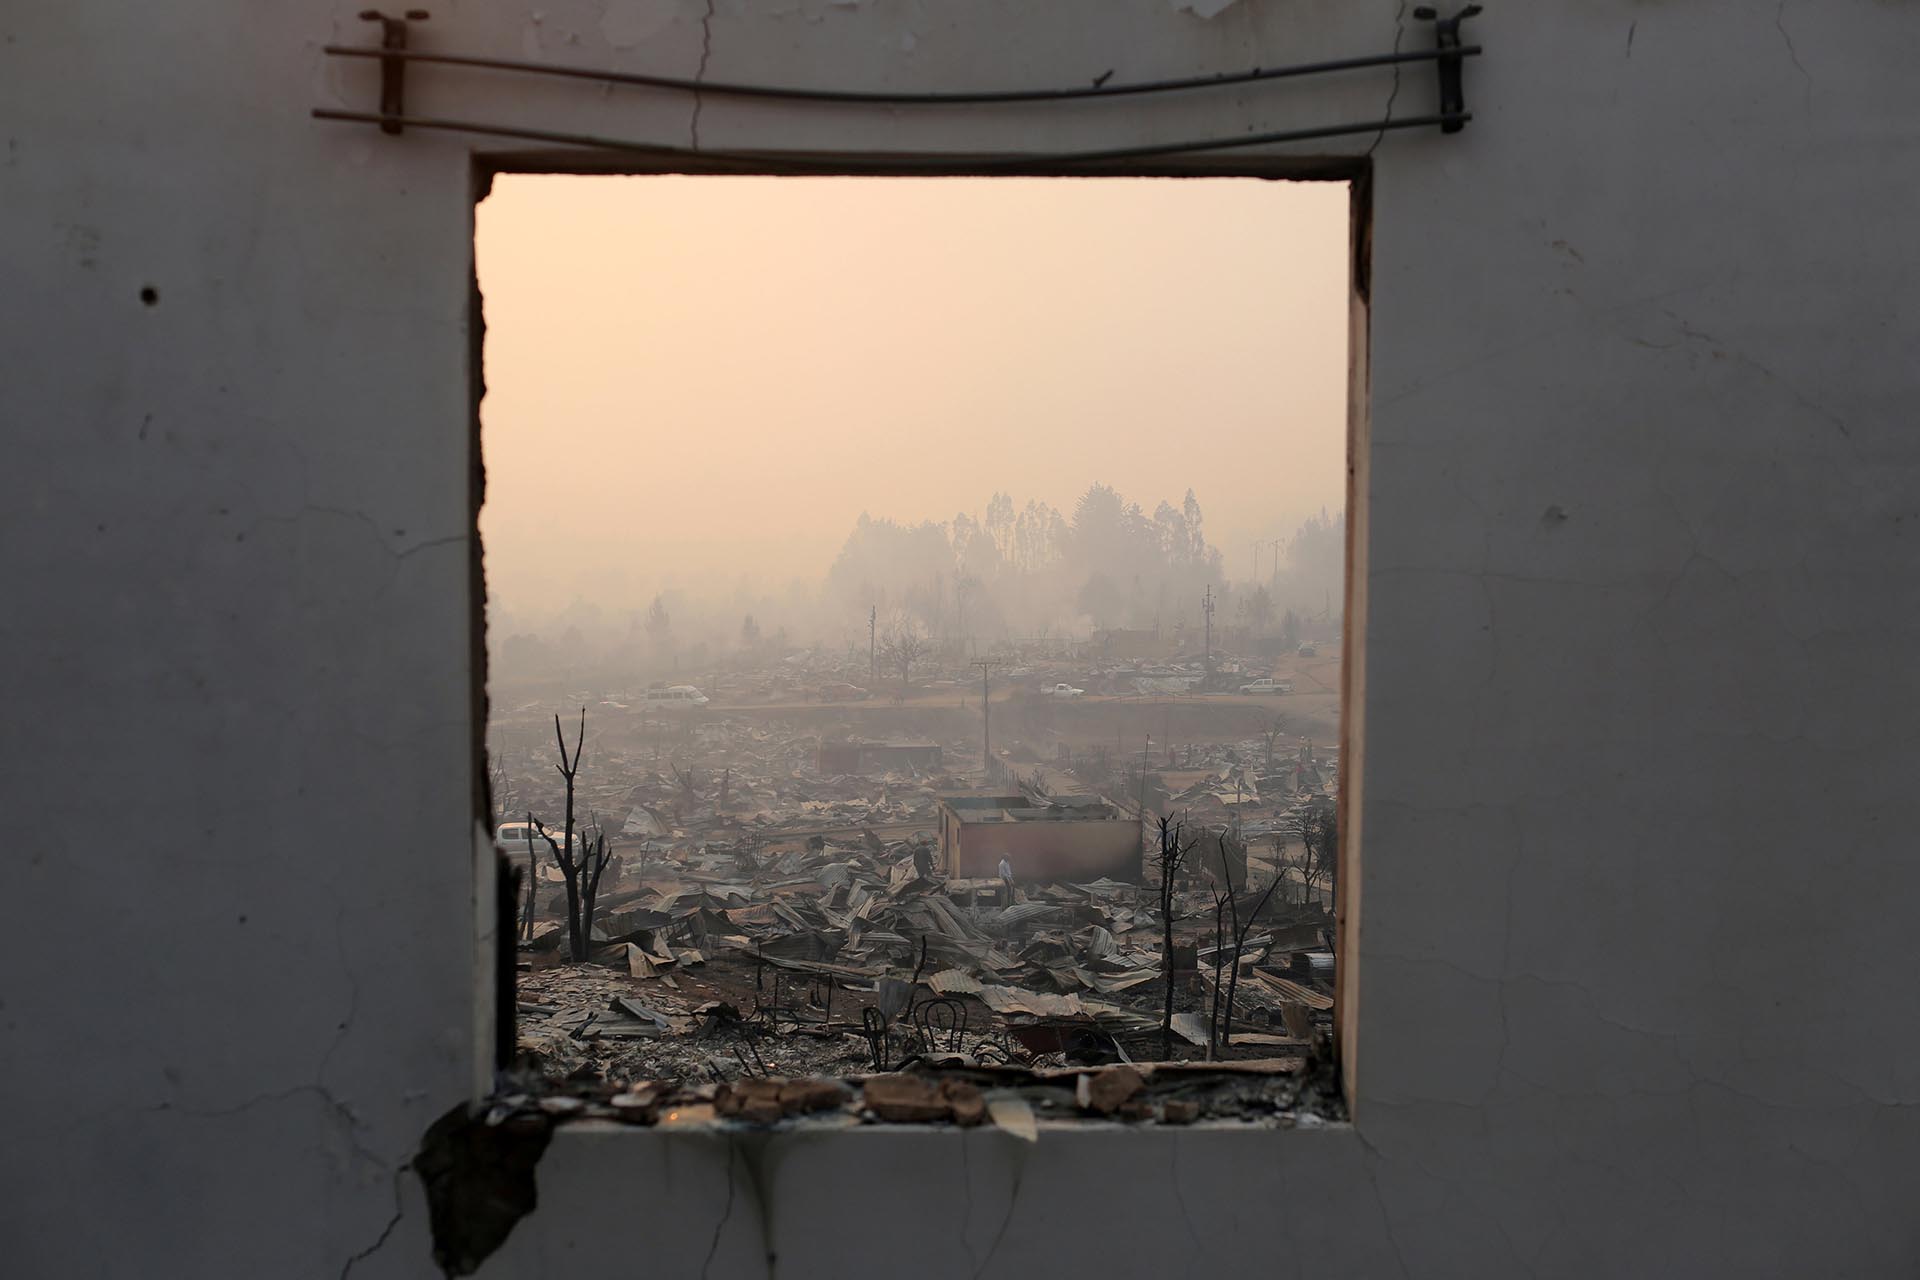 The remains of burnt houses are seen through the window of a destroyed house as the worst wildfires in Chile's modern history ravage wide swaths of the country's central-south regions, in Santa Olga, Chile January 26, 2017. REUTERS/Pablo Sanhueza EDITORIAL USE ONLY. NO RESALES. NO ARCHIVE. TPX IMAGES OF THE DAY